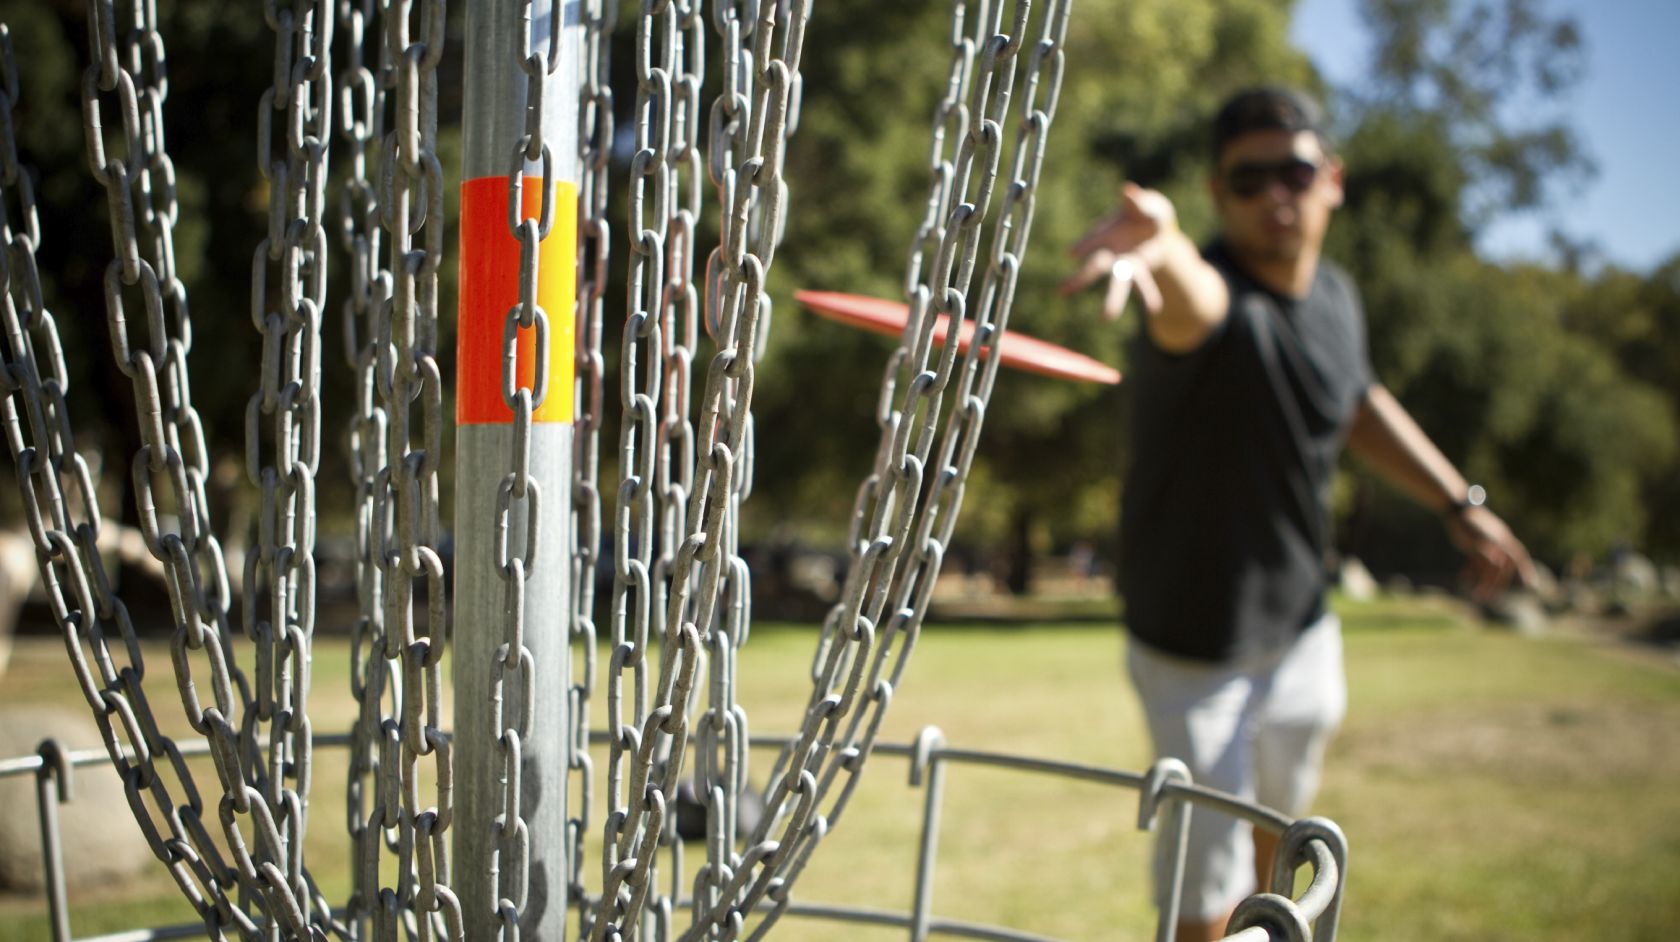 Man throws Frisbee into net during a game of Disc Golf at Sea Pines Golf Resort in Morro Bay